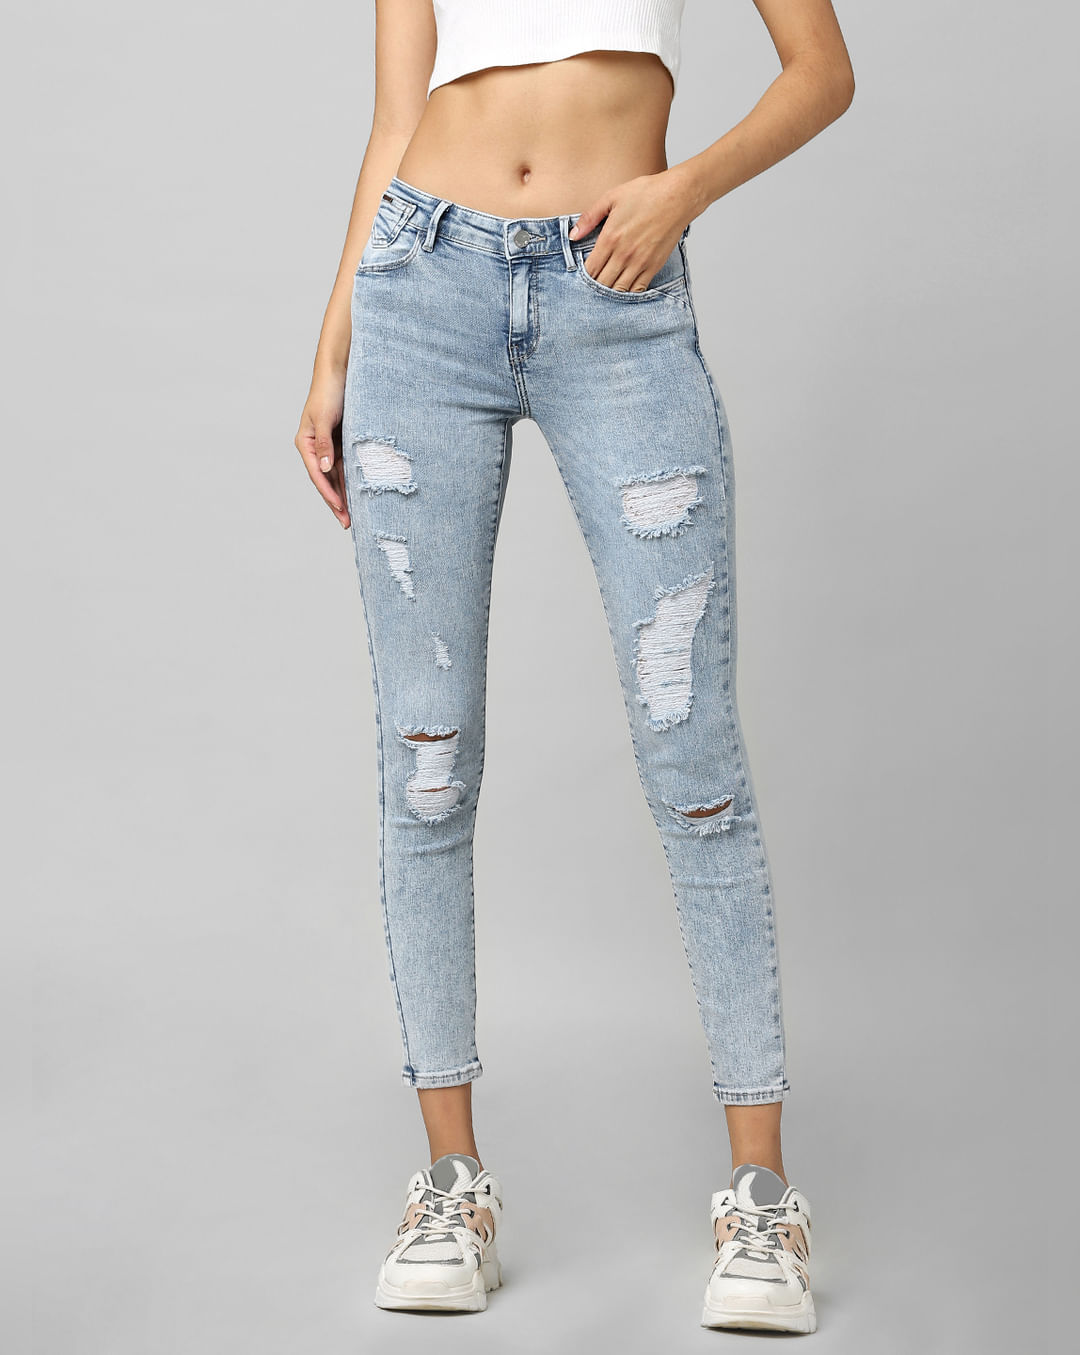 Women High Waist Destroyed Stretch Jeans Trousers Ripped Denim Skinny Pants  